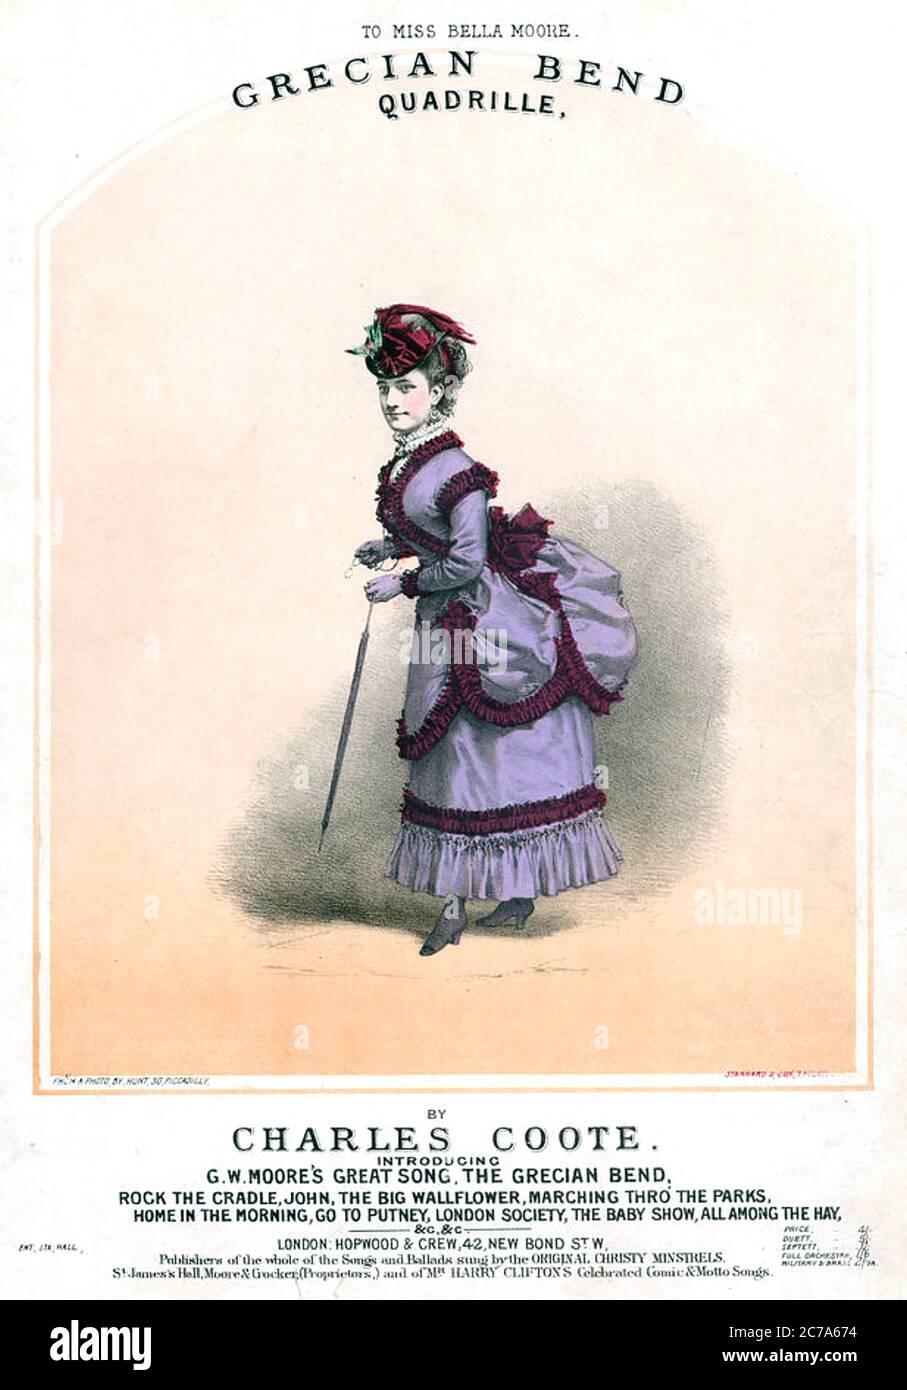 GRECIAN BEND Sheet music based on the 1860s fashion for bustles Stock Photo